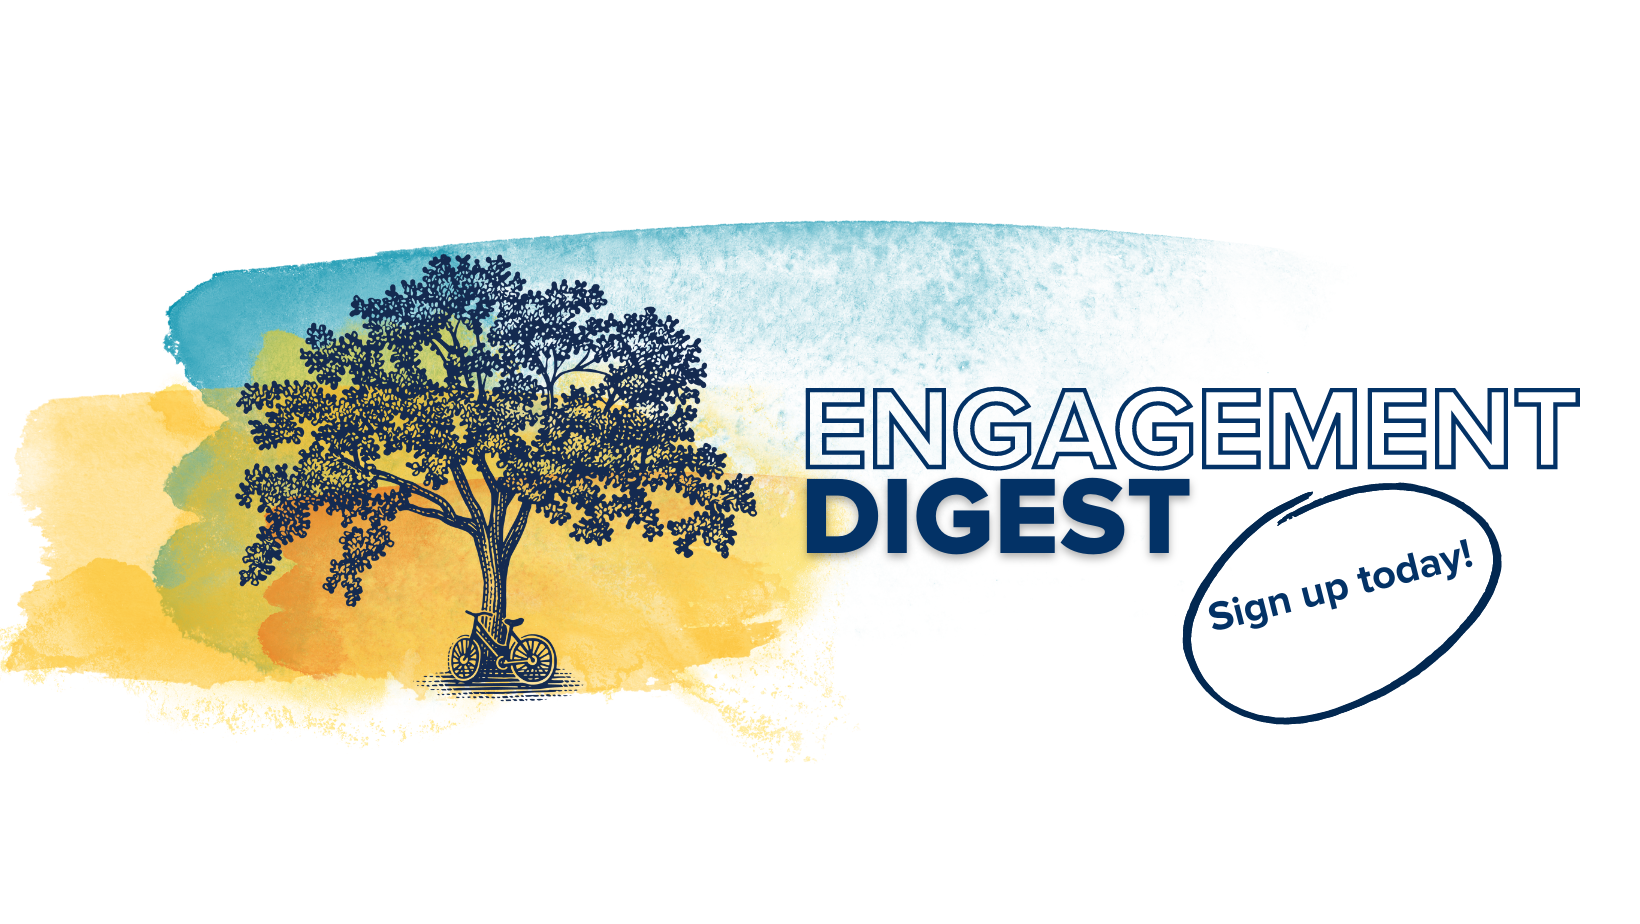 Graphic of tree next to text that says "Engagement Digest" and "Sign up today!"